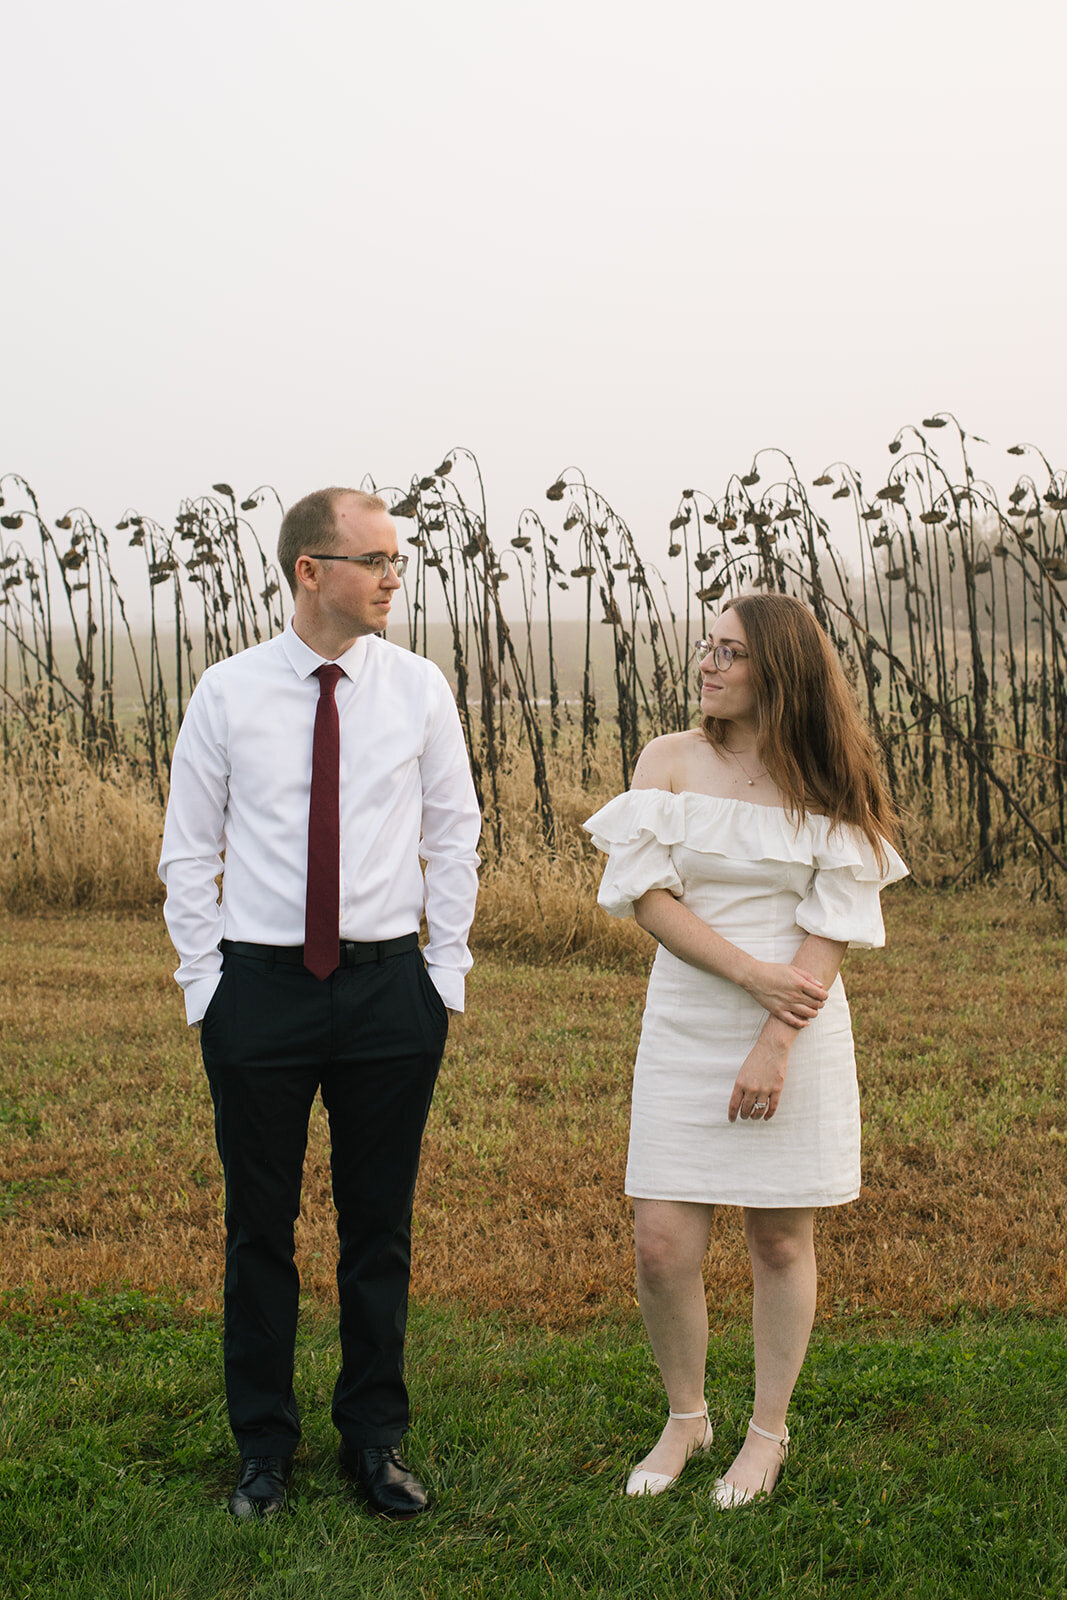 Bride and Groom in field